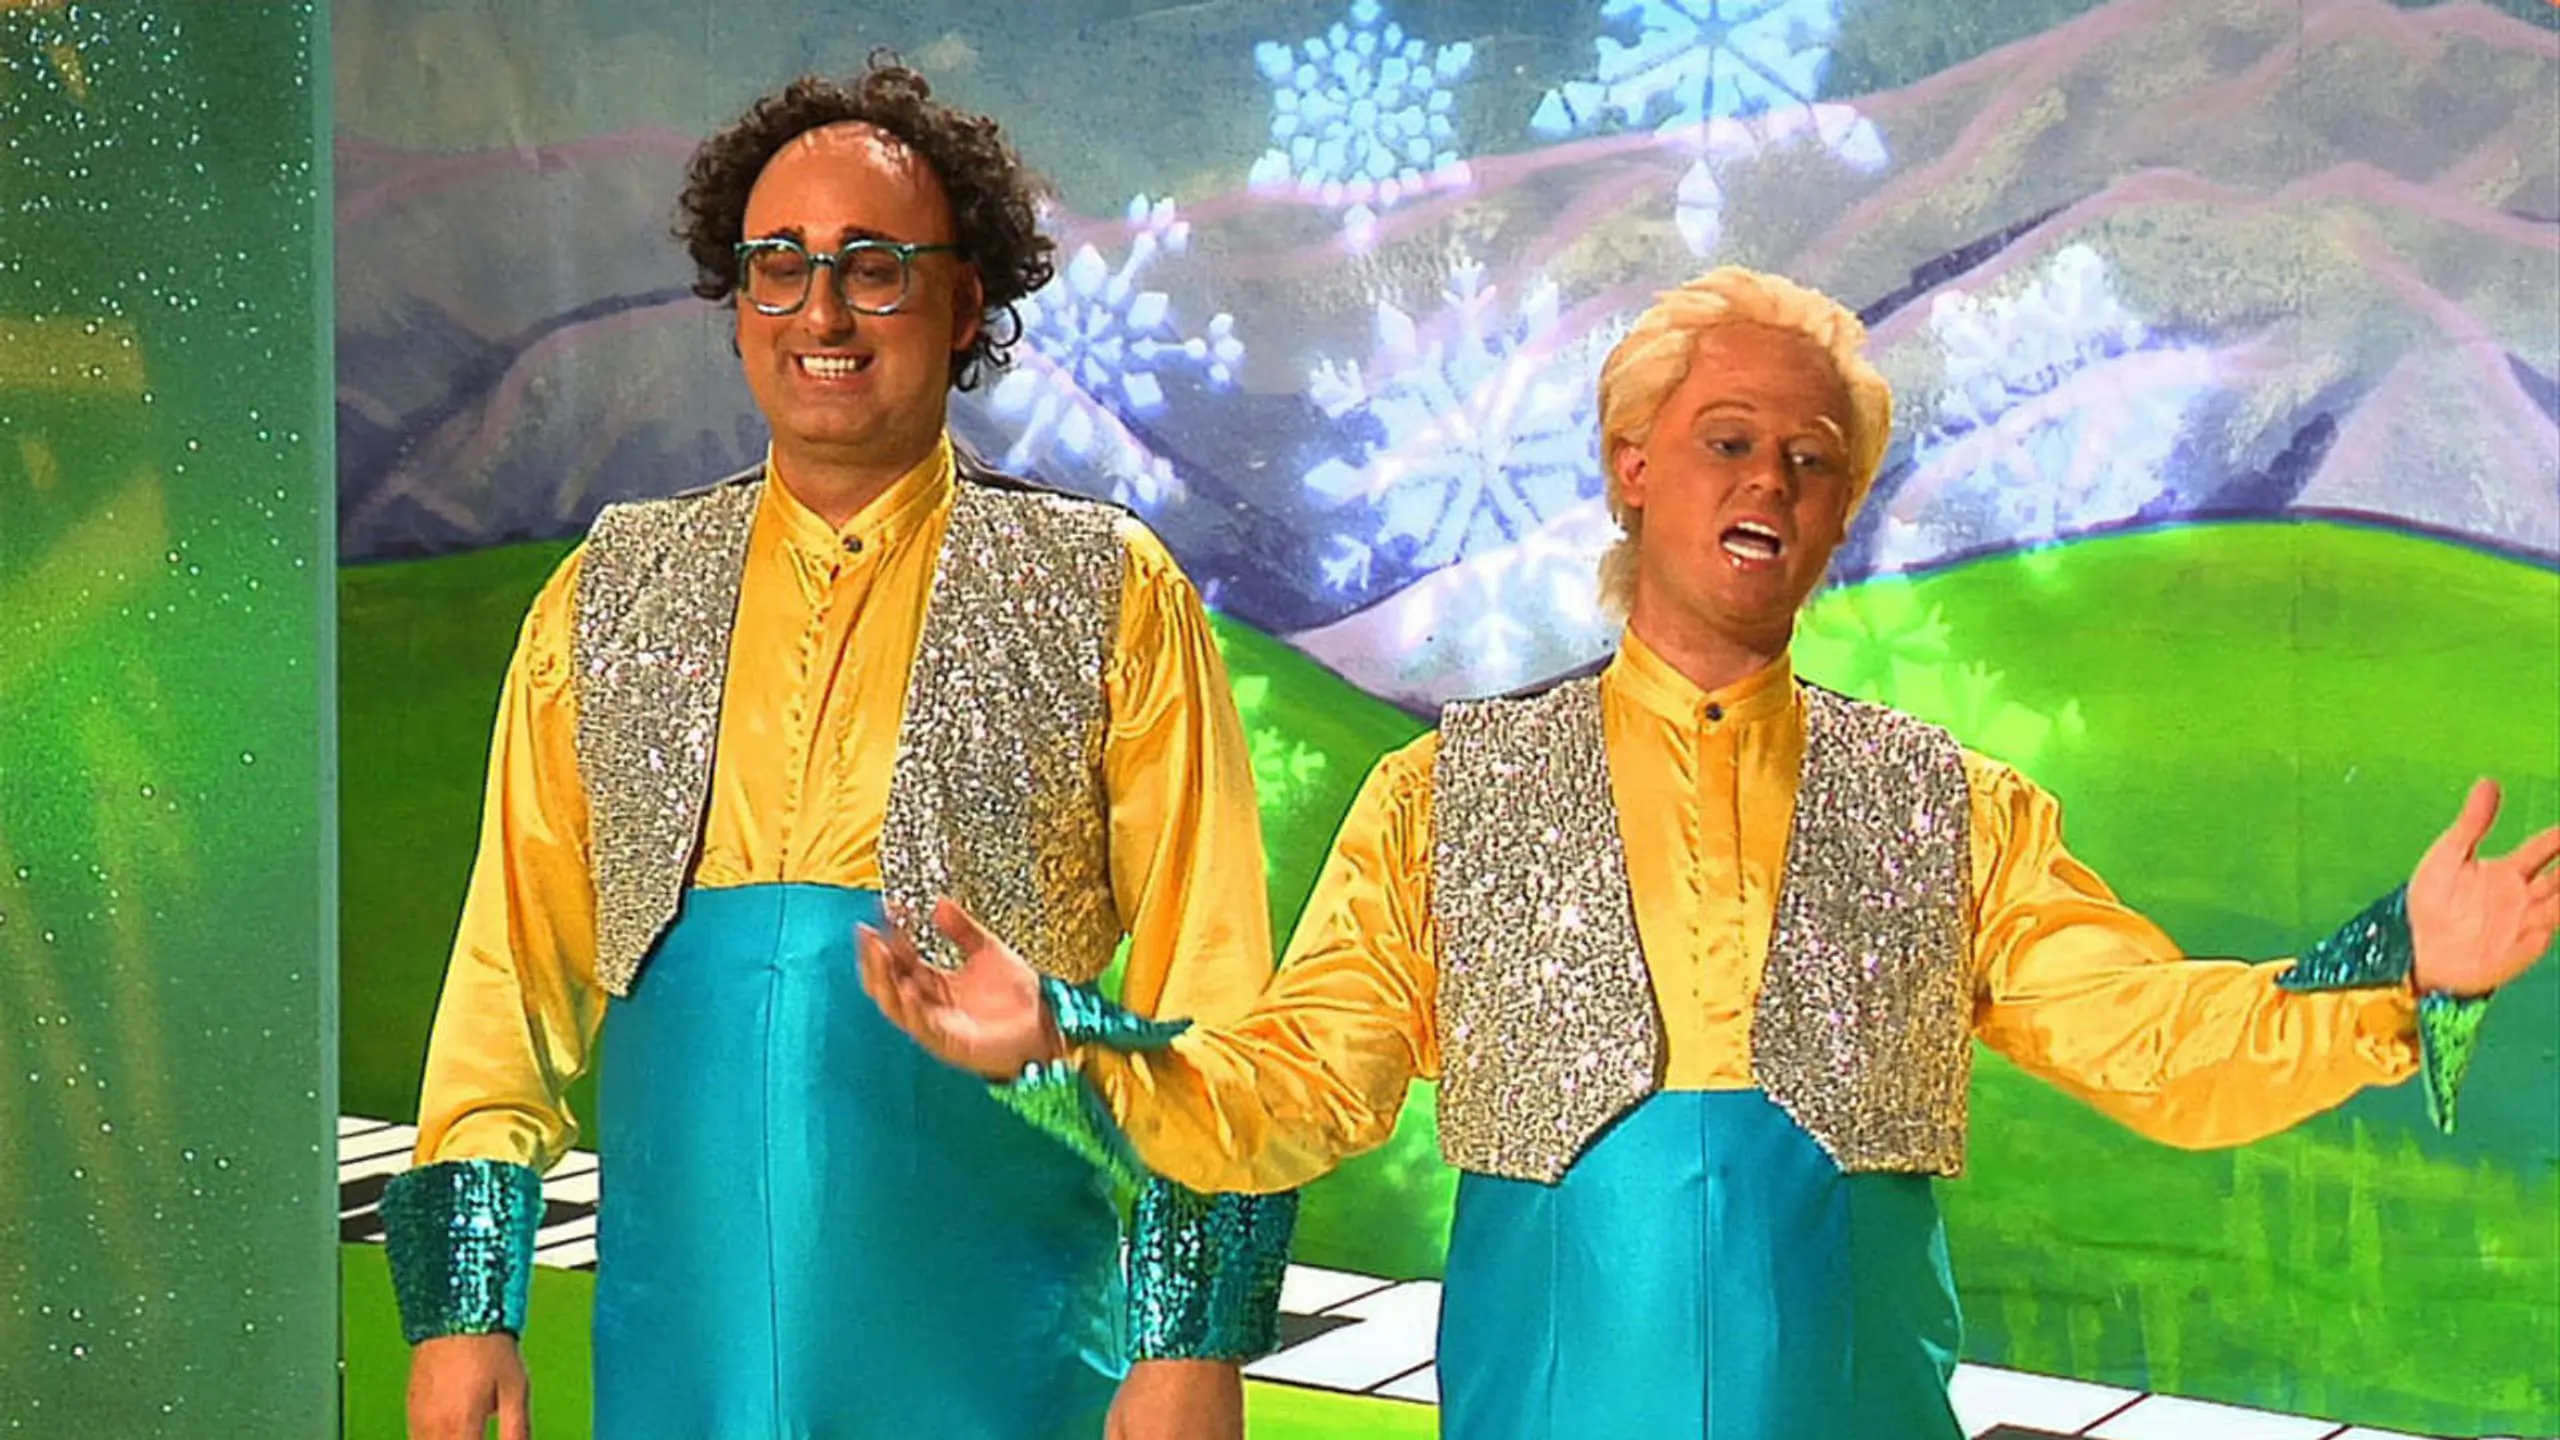 Tim and Eric Awesome Show, Great Job! Chrimbus Special